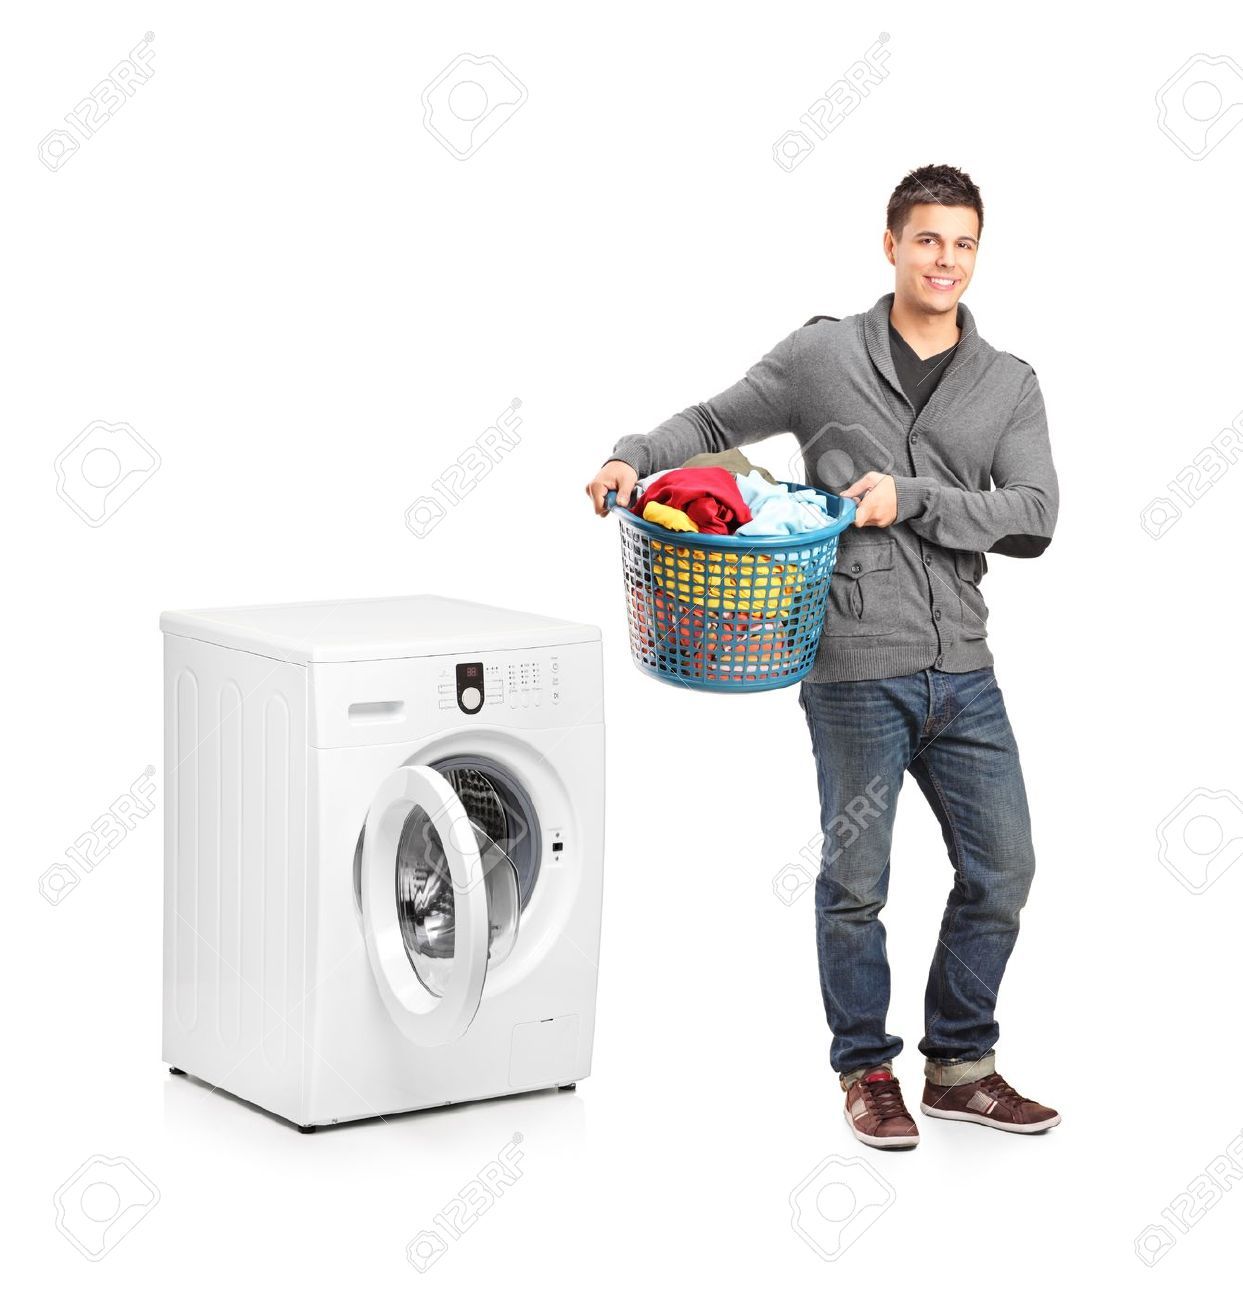 Washing Machines Sales And Services Near index 1.html